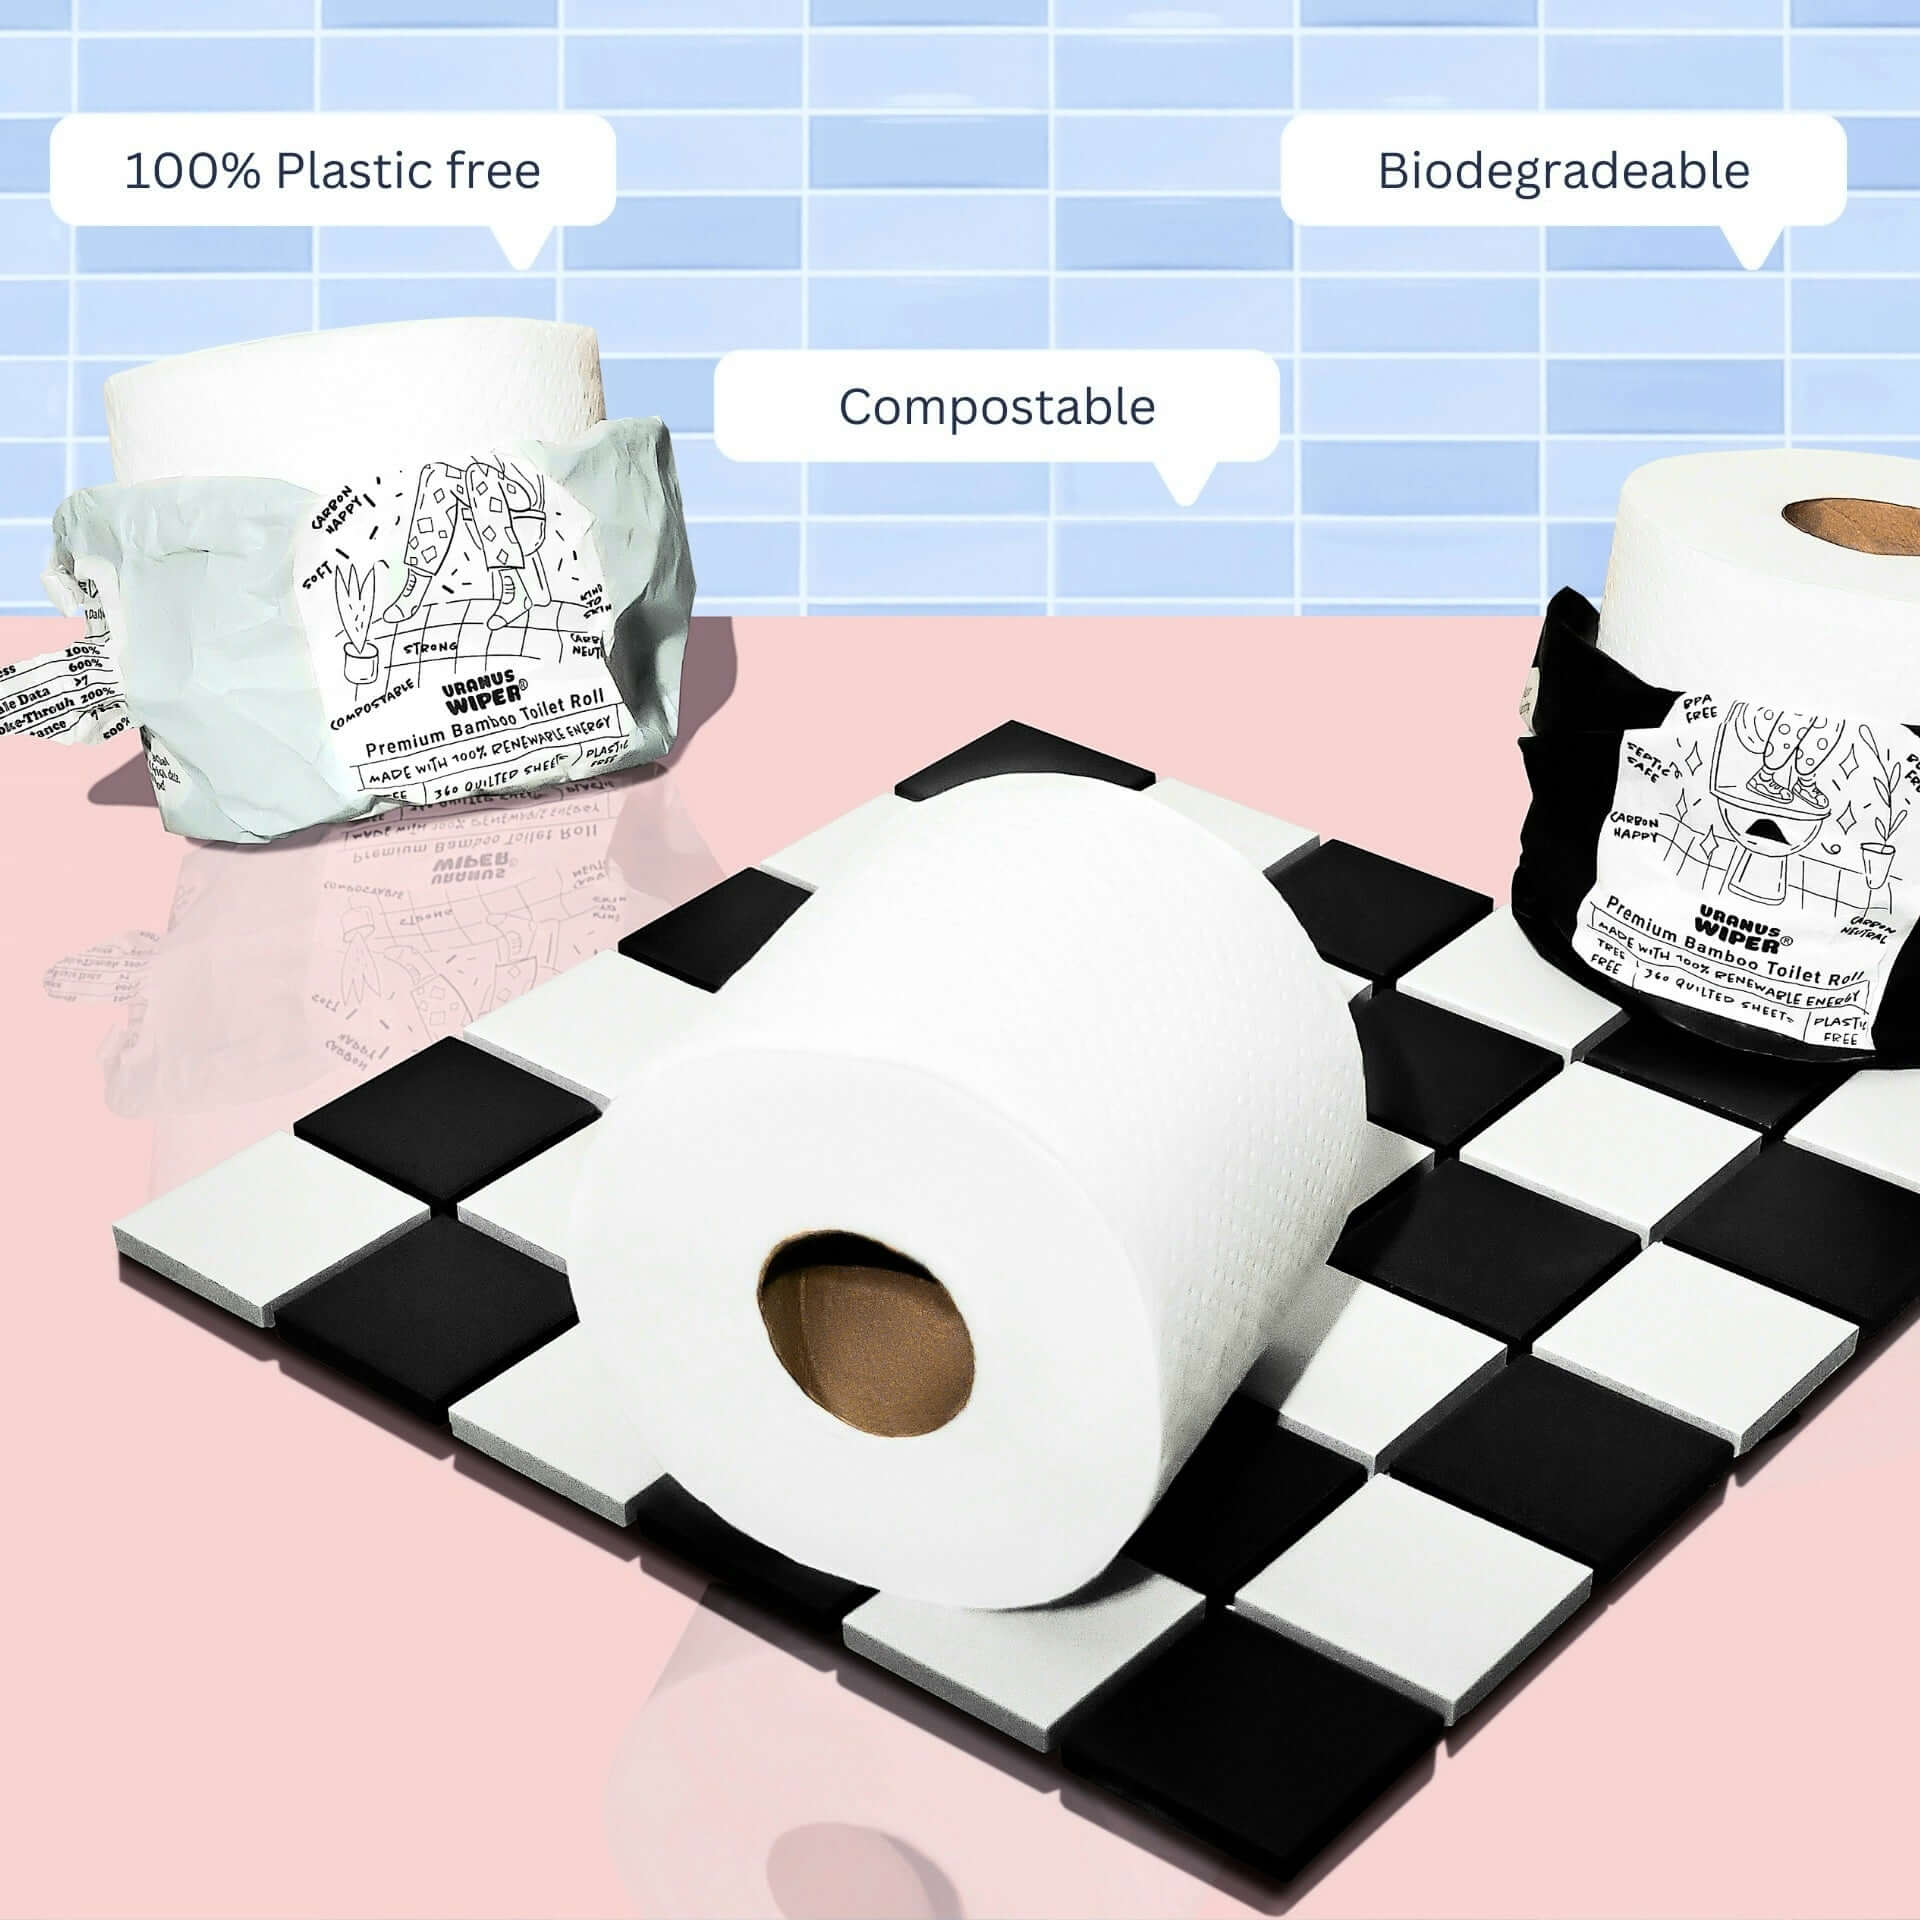 Compostable biodegradeable plastic free toilet roll 